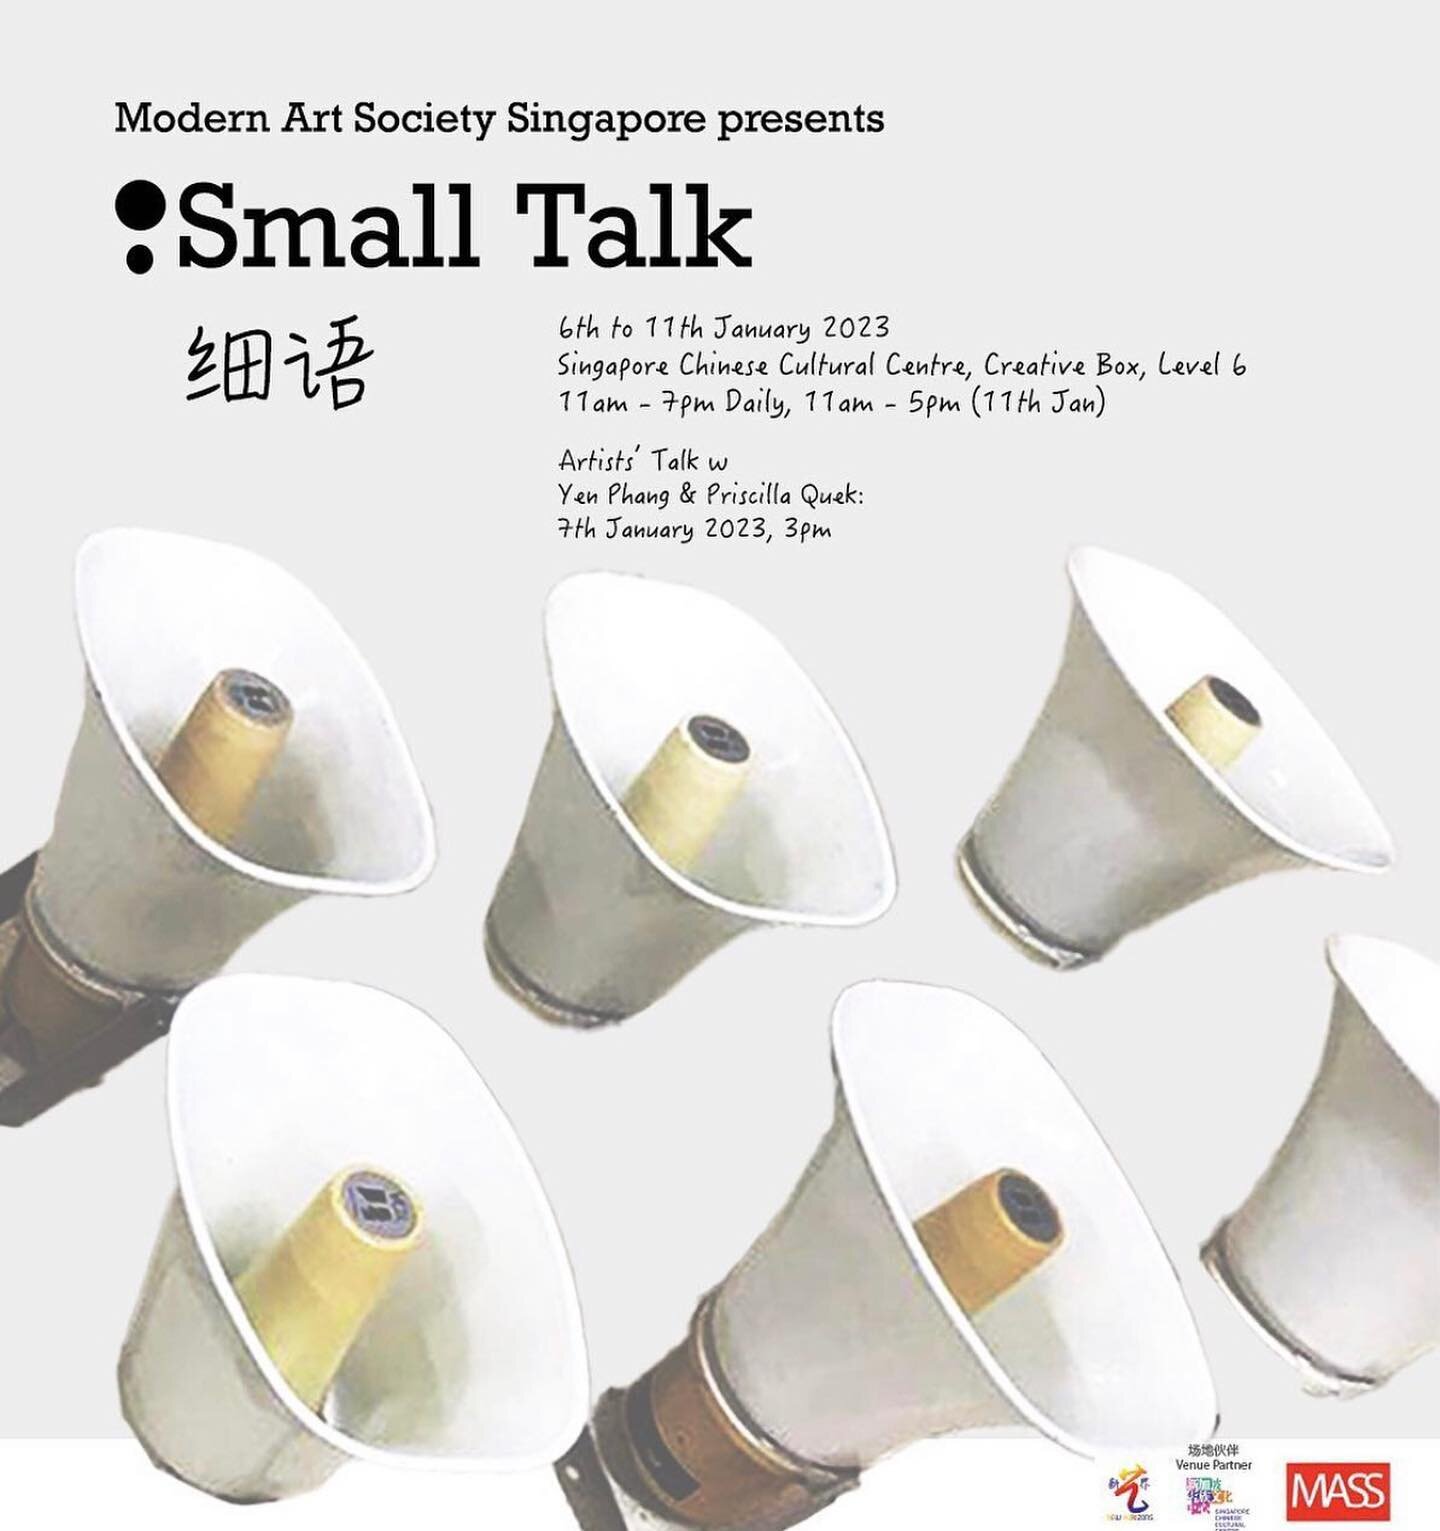 Thank you Modern Art Society for including me in Small Talk Exhibition! 🙏🏻

The show will be held at Singapore Chinese Cultural Center, Creative Box, Level 6 : from the 6th-11th January 2023 from 11am to 7pm, and will end slightly earlier at 5pm on